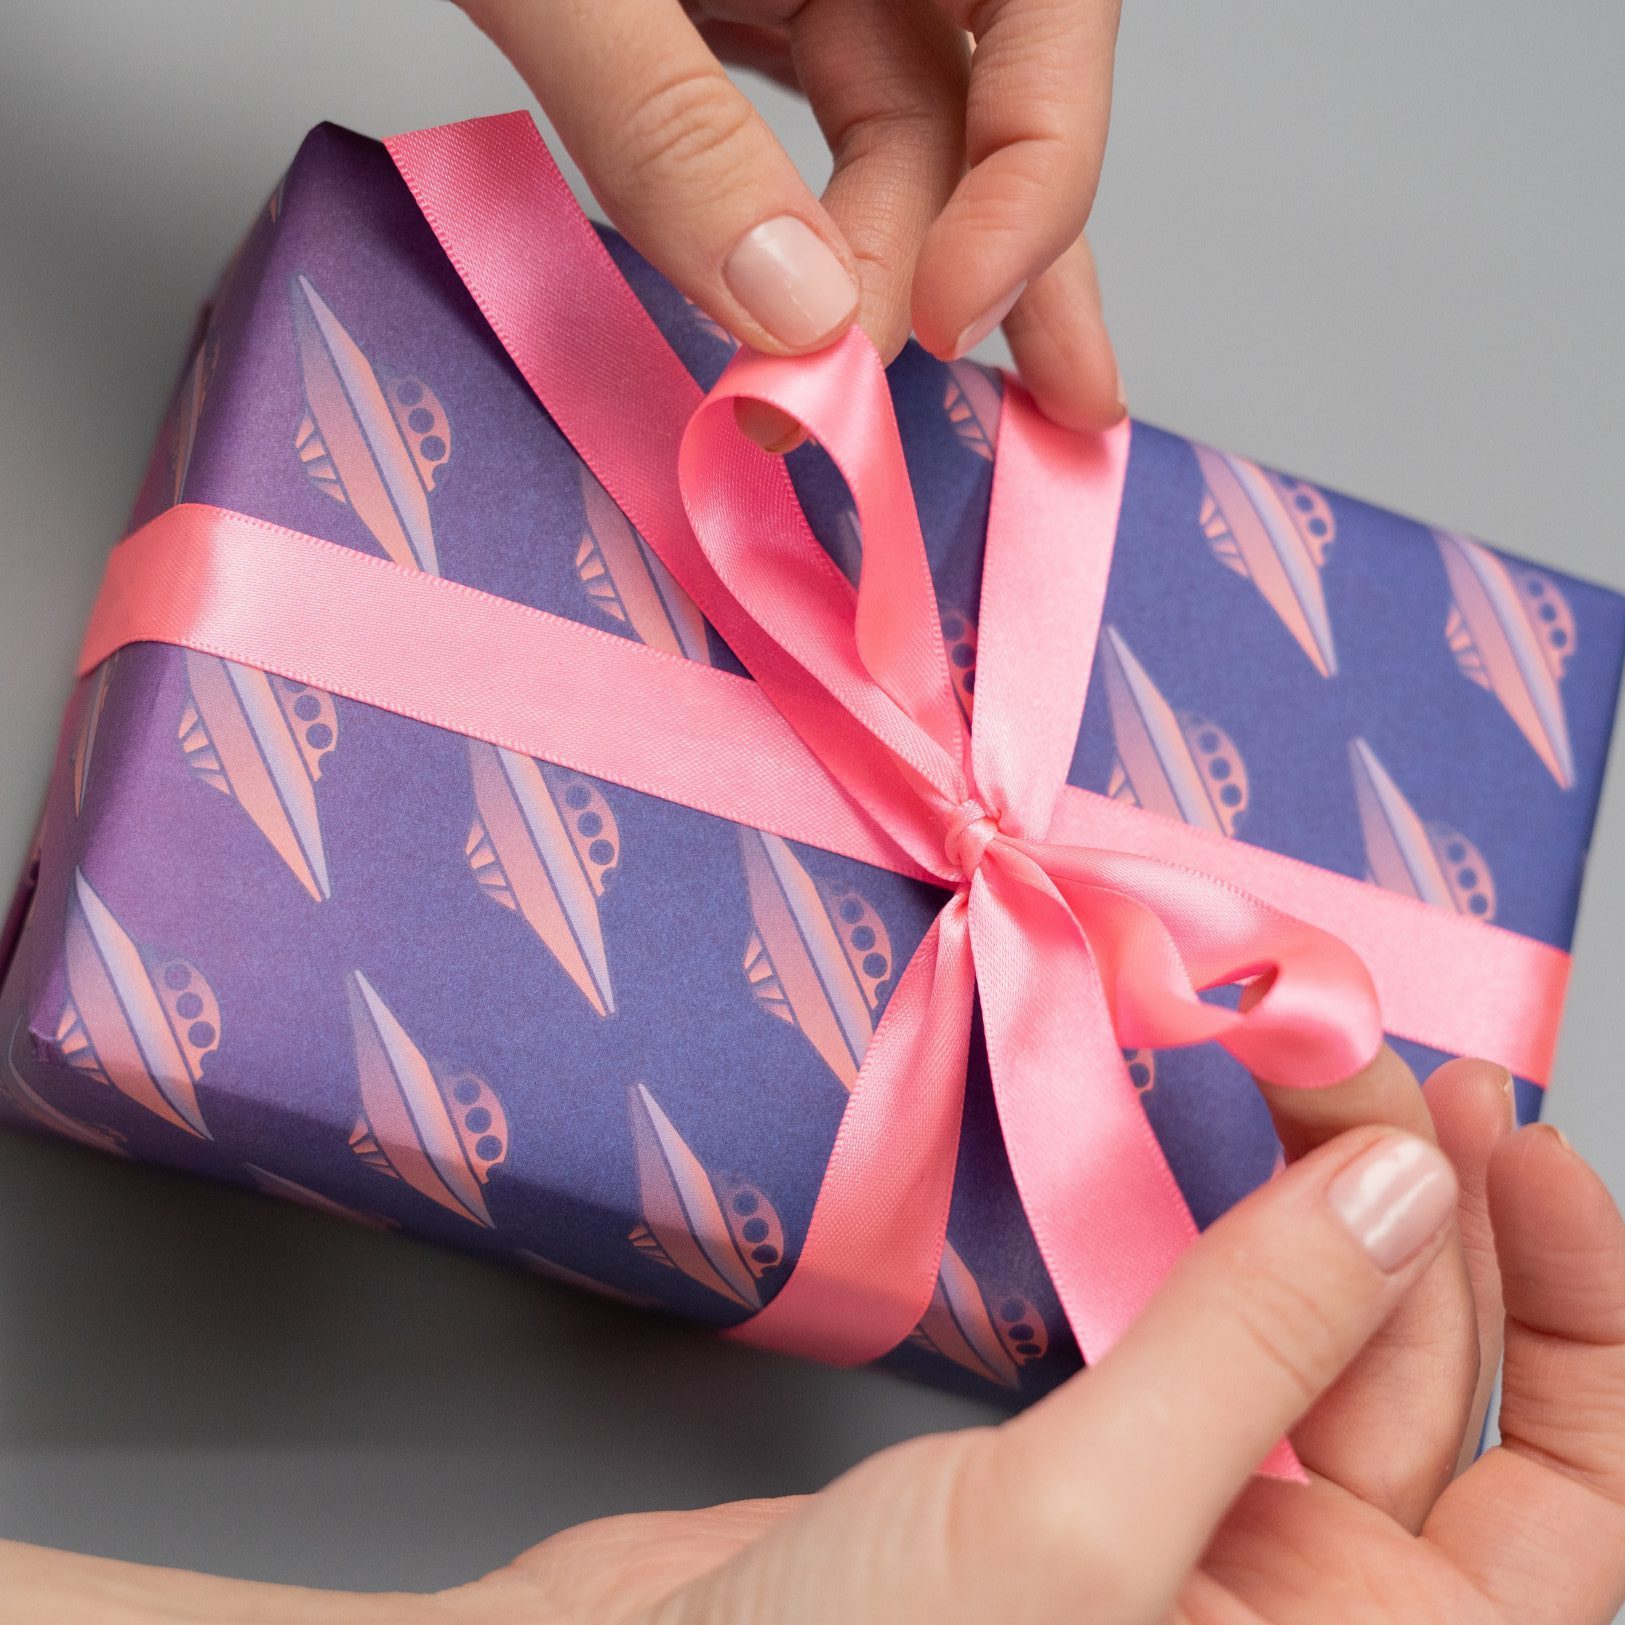 Tips For The Perfectly-Wrapped Gift